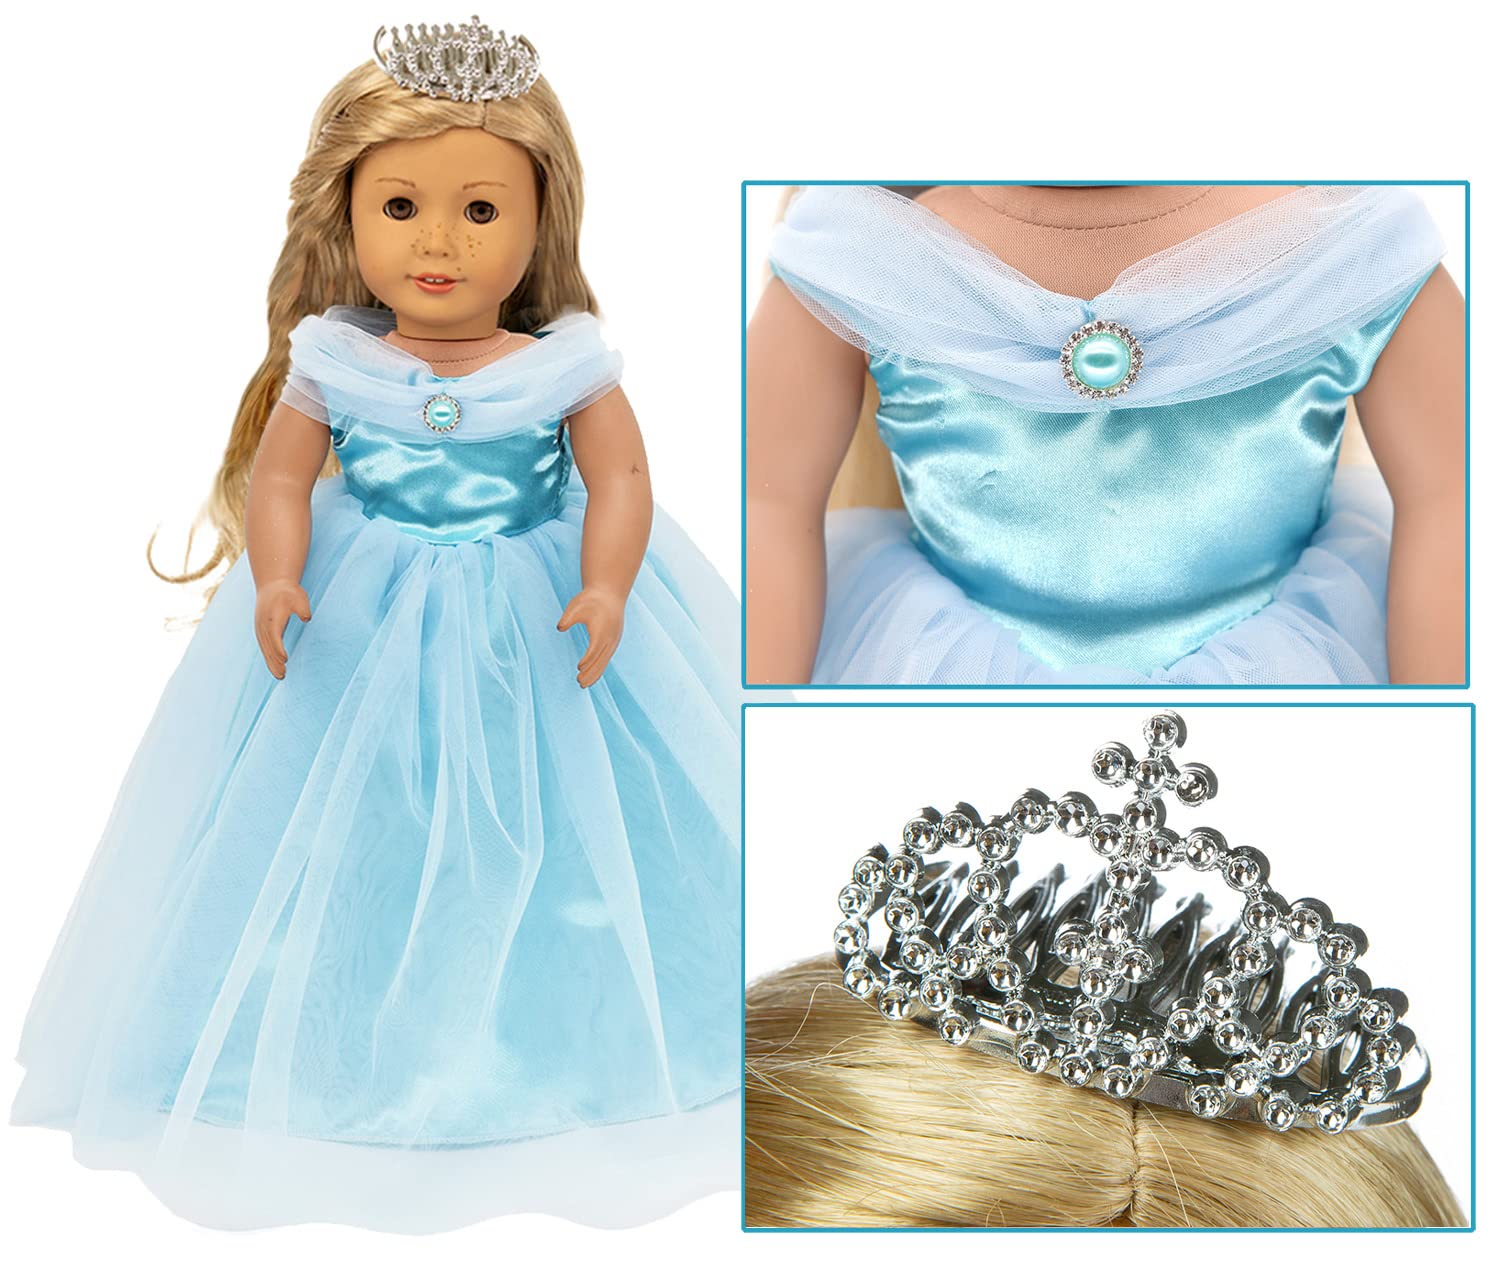 HWD Girls Doll Clothes and Accessories, Princess Costume, Wedding Dress, Party Gown Dress Fit 18 inch American Girl Dolls (Blue2)